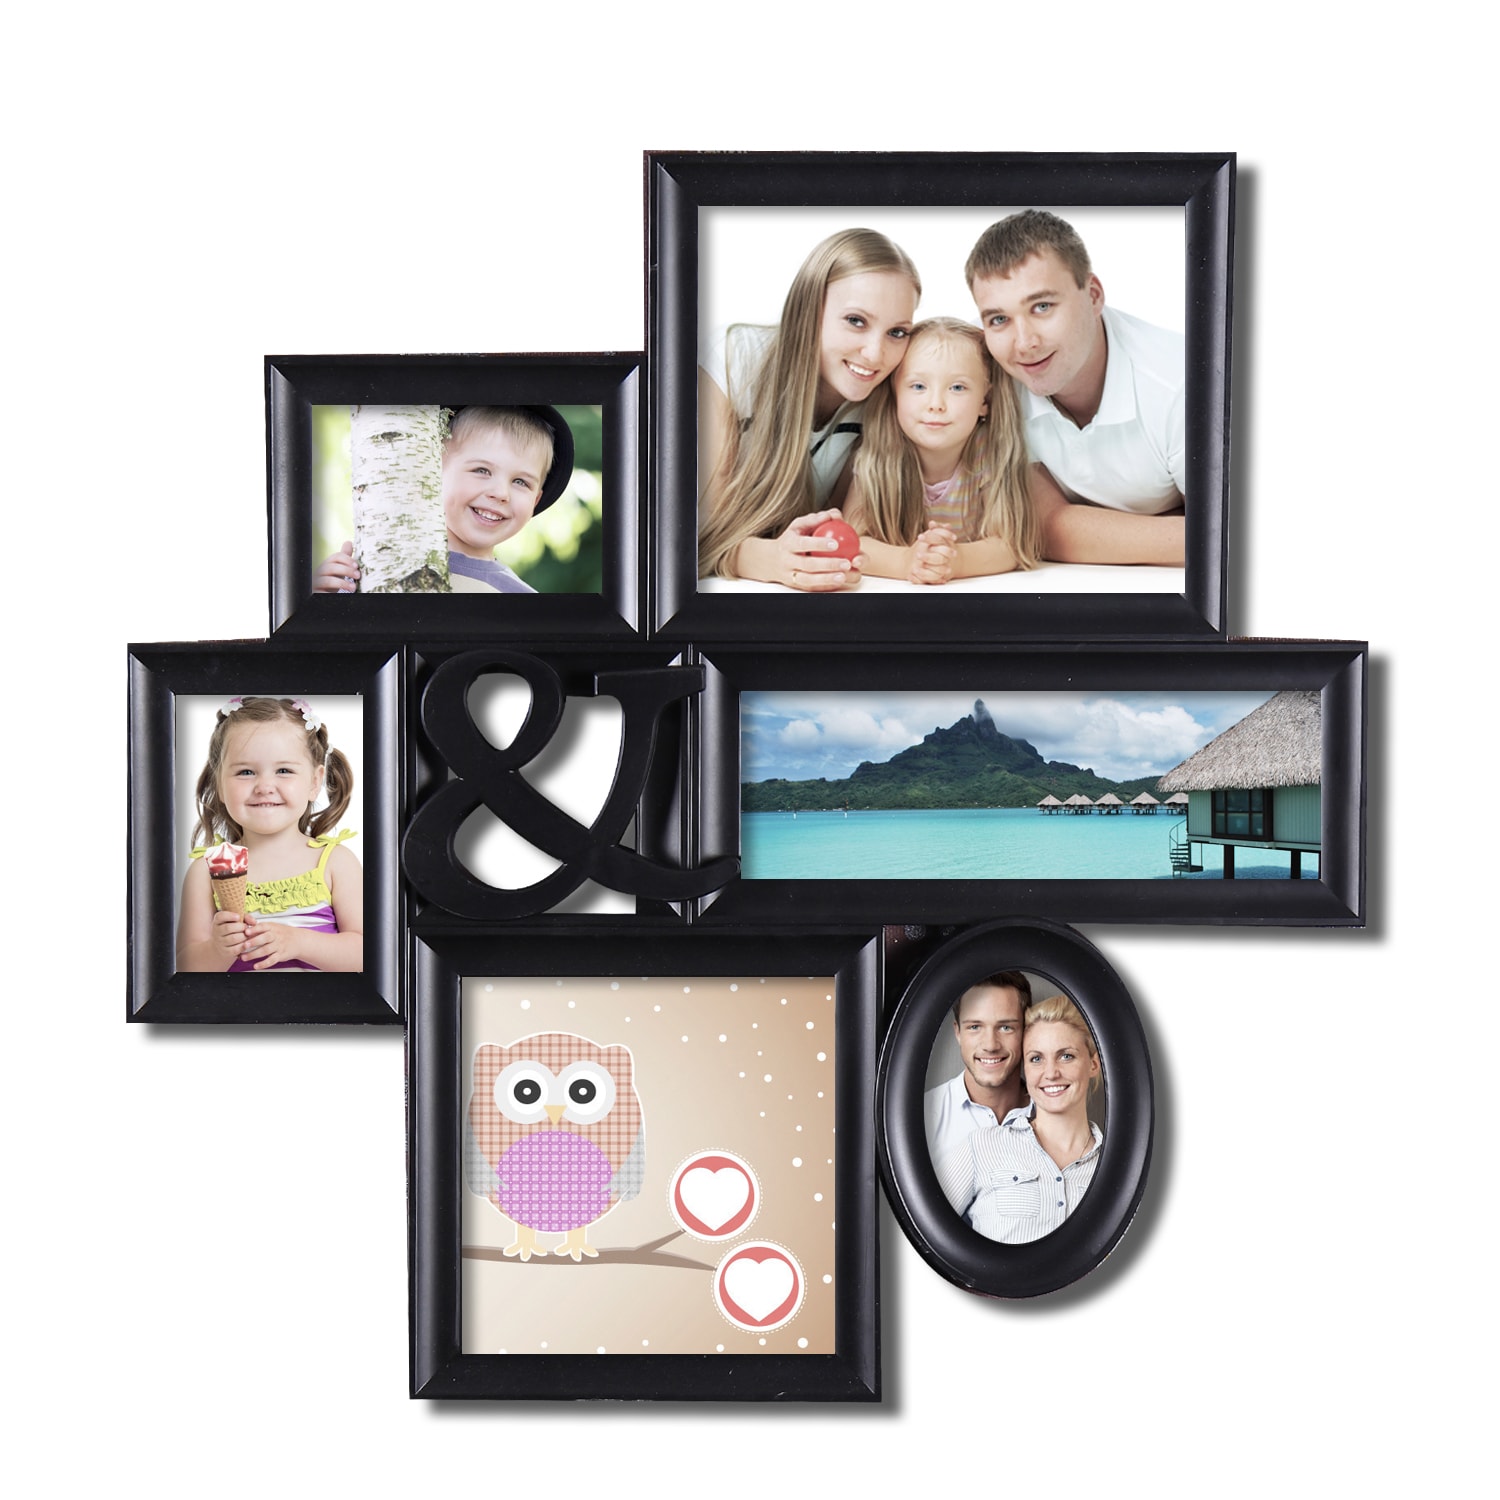 https://ak1.ostkcdn.com/images/products/9067640/Adeco-6-opening-Black-Plastic-Hanging-Photo-Collage-Frame-L16260774.jpg